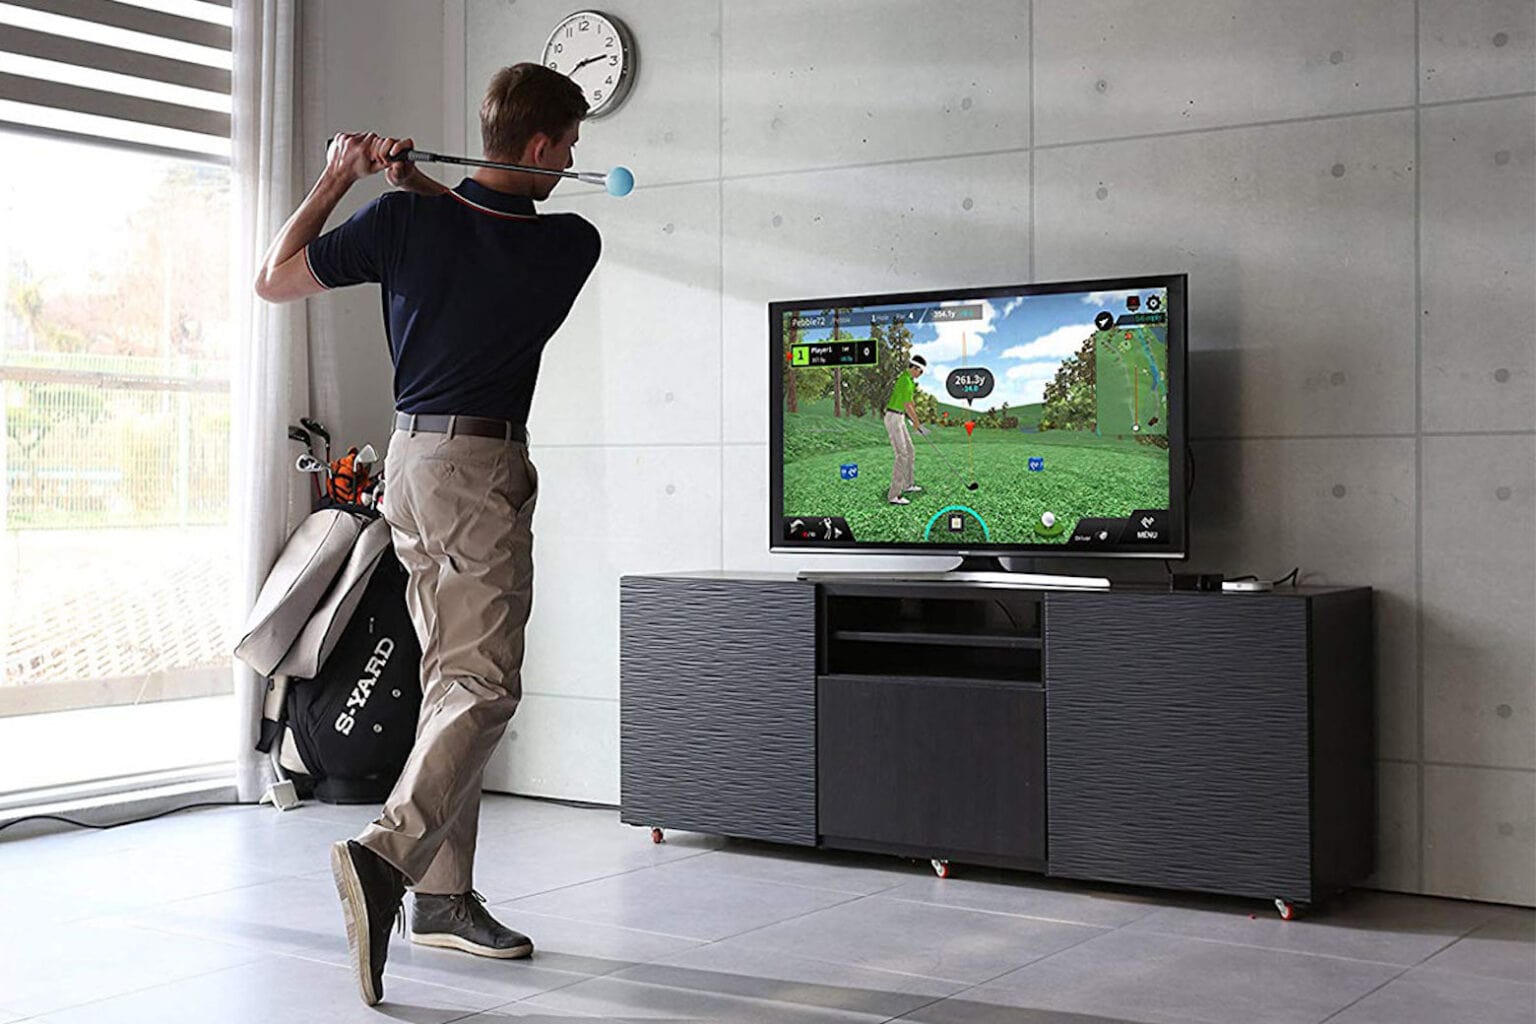 Up your game and lower your handicap with this entertaining golf simulator.